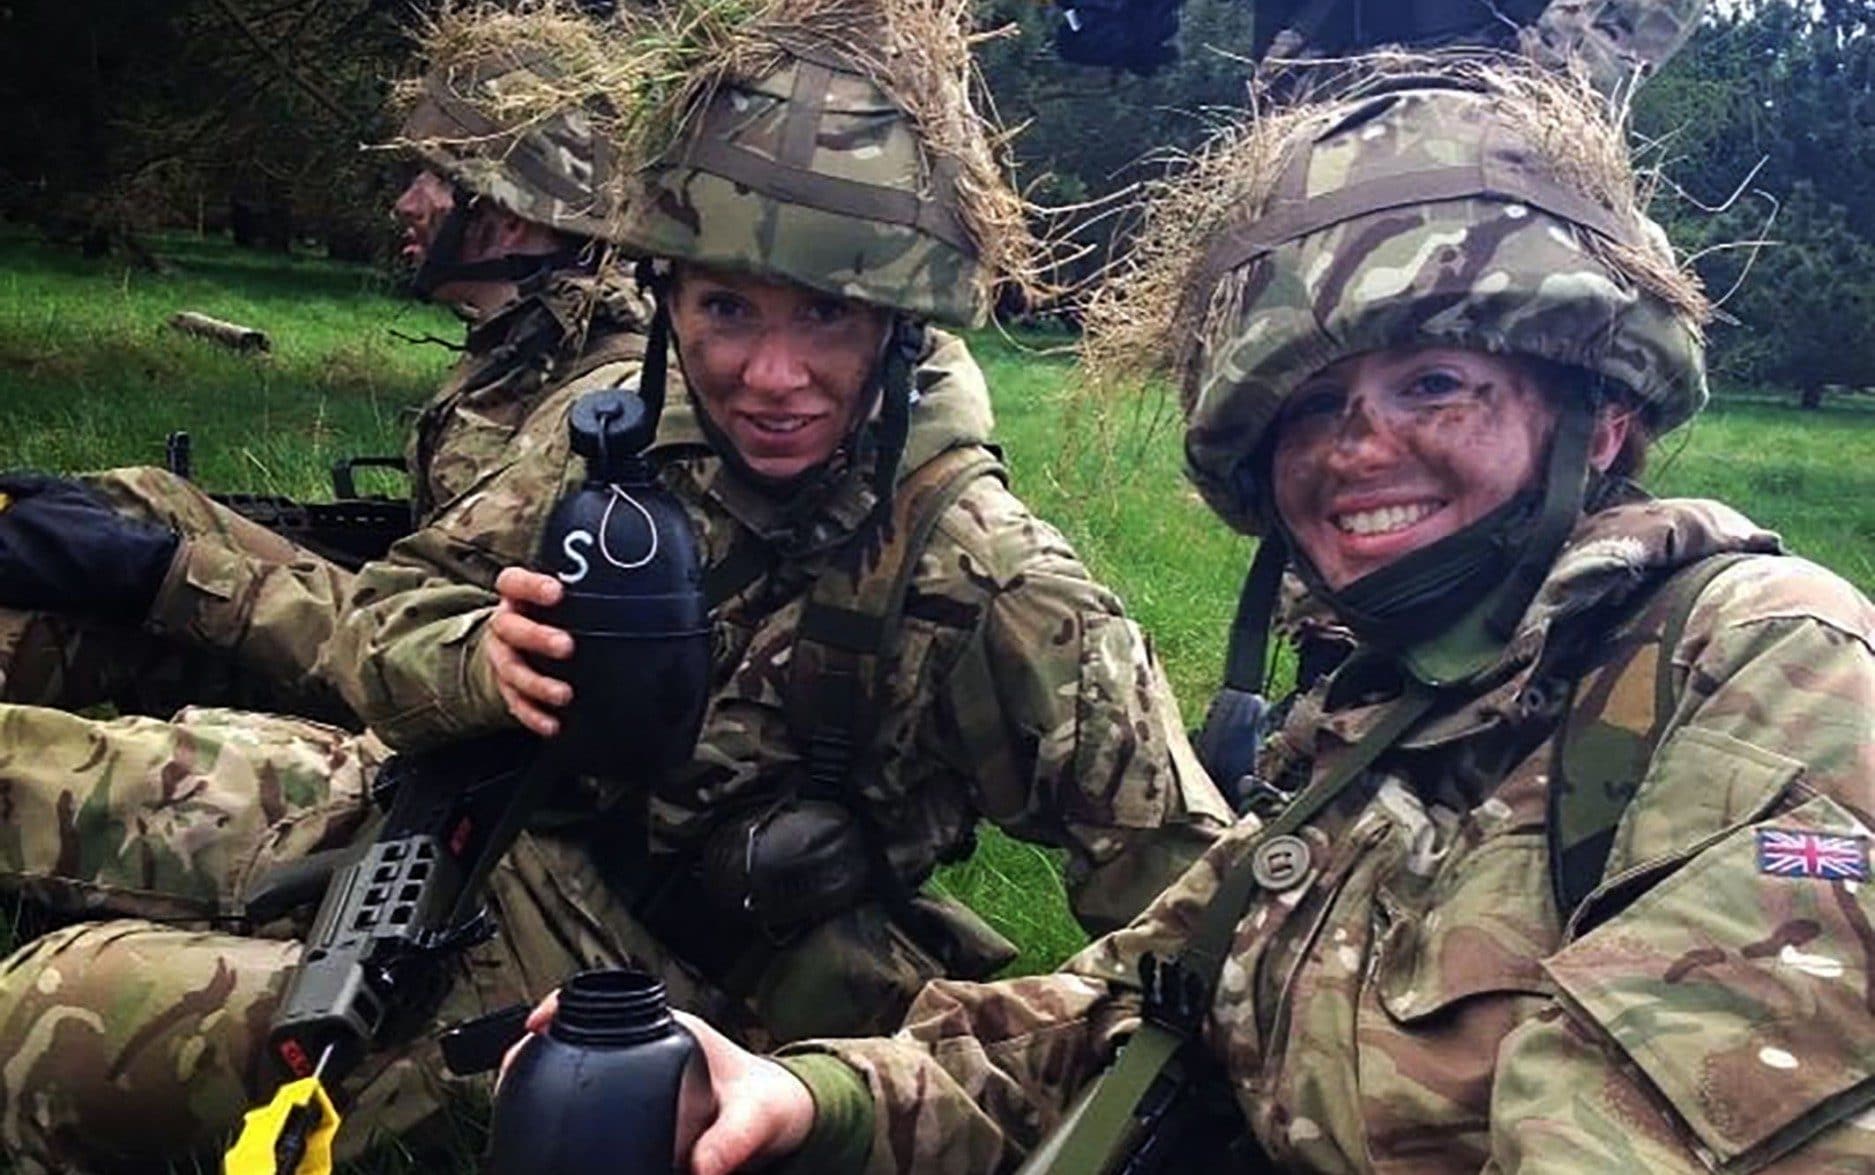 ‘If the new National Service is anything like the TA, they’ll have a great time’